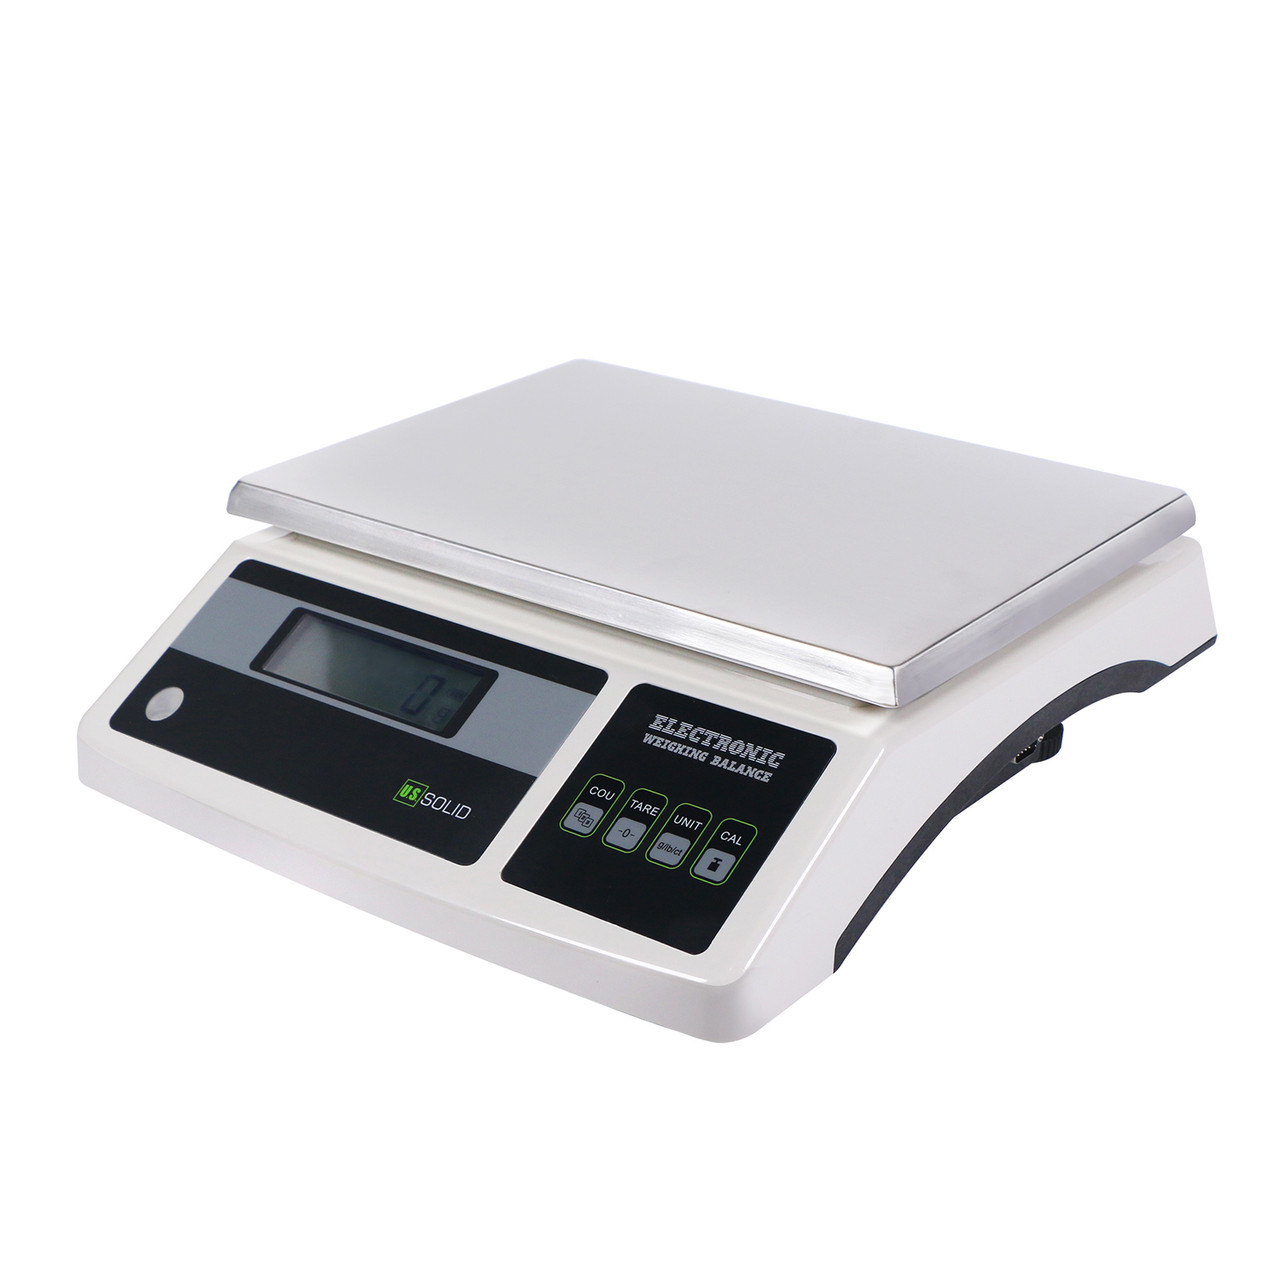 The Teachers' Lounge®  Digital Scale - Weigh in Pounds, Ounces